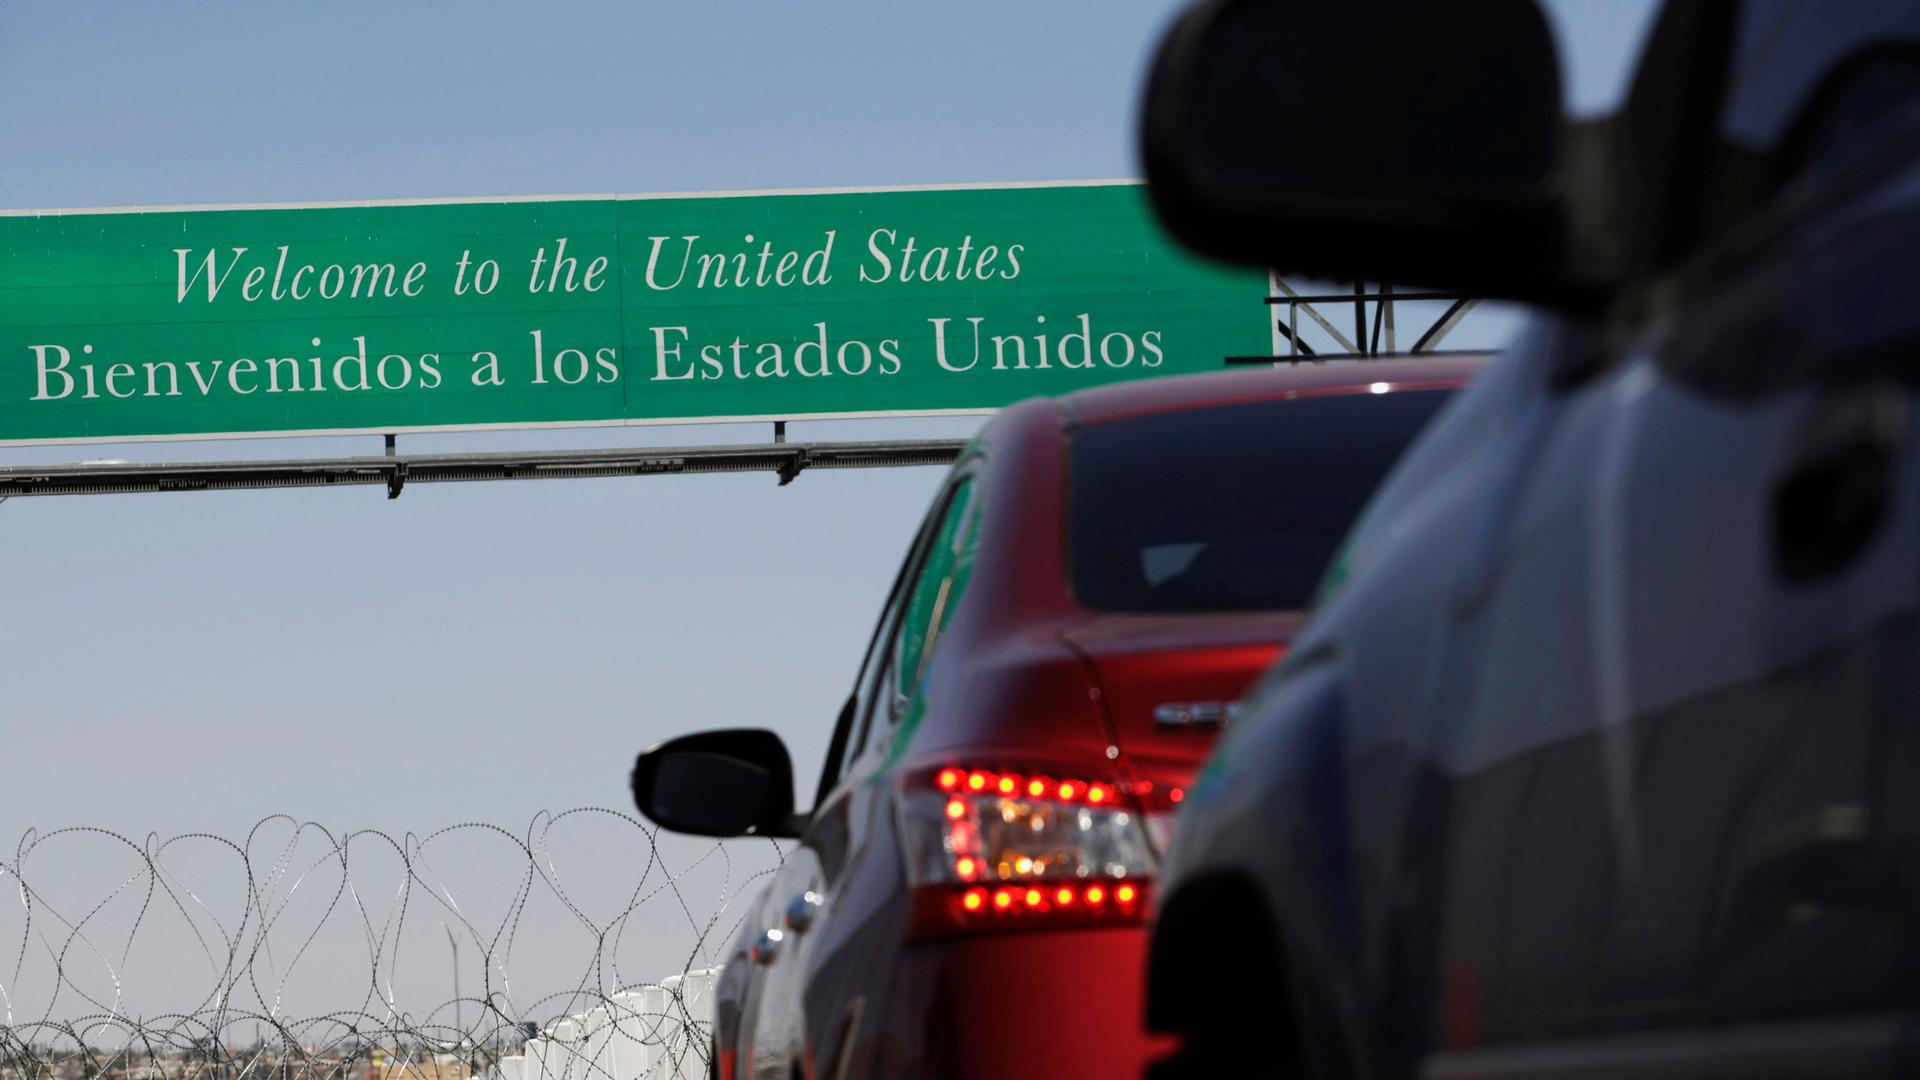 A sign says "Welcome to the United States" as cars line up underneath it